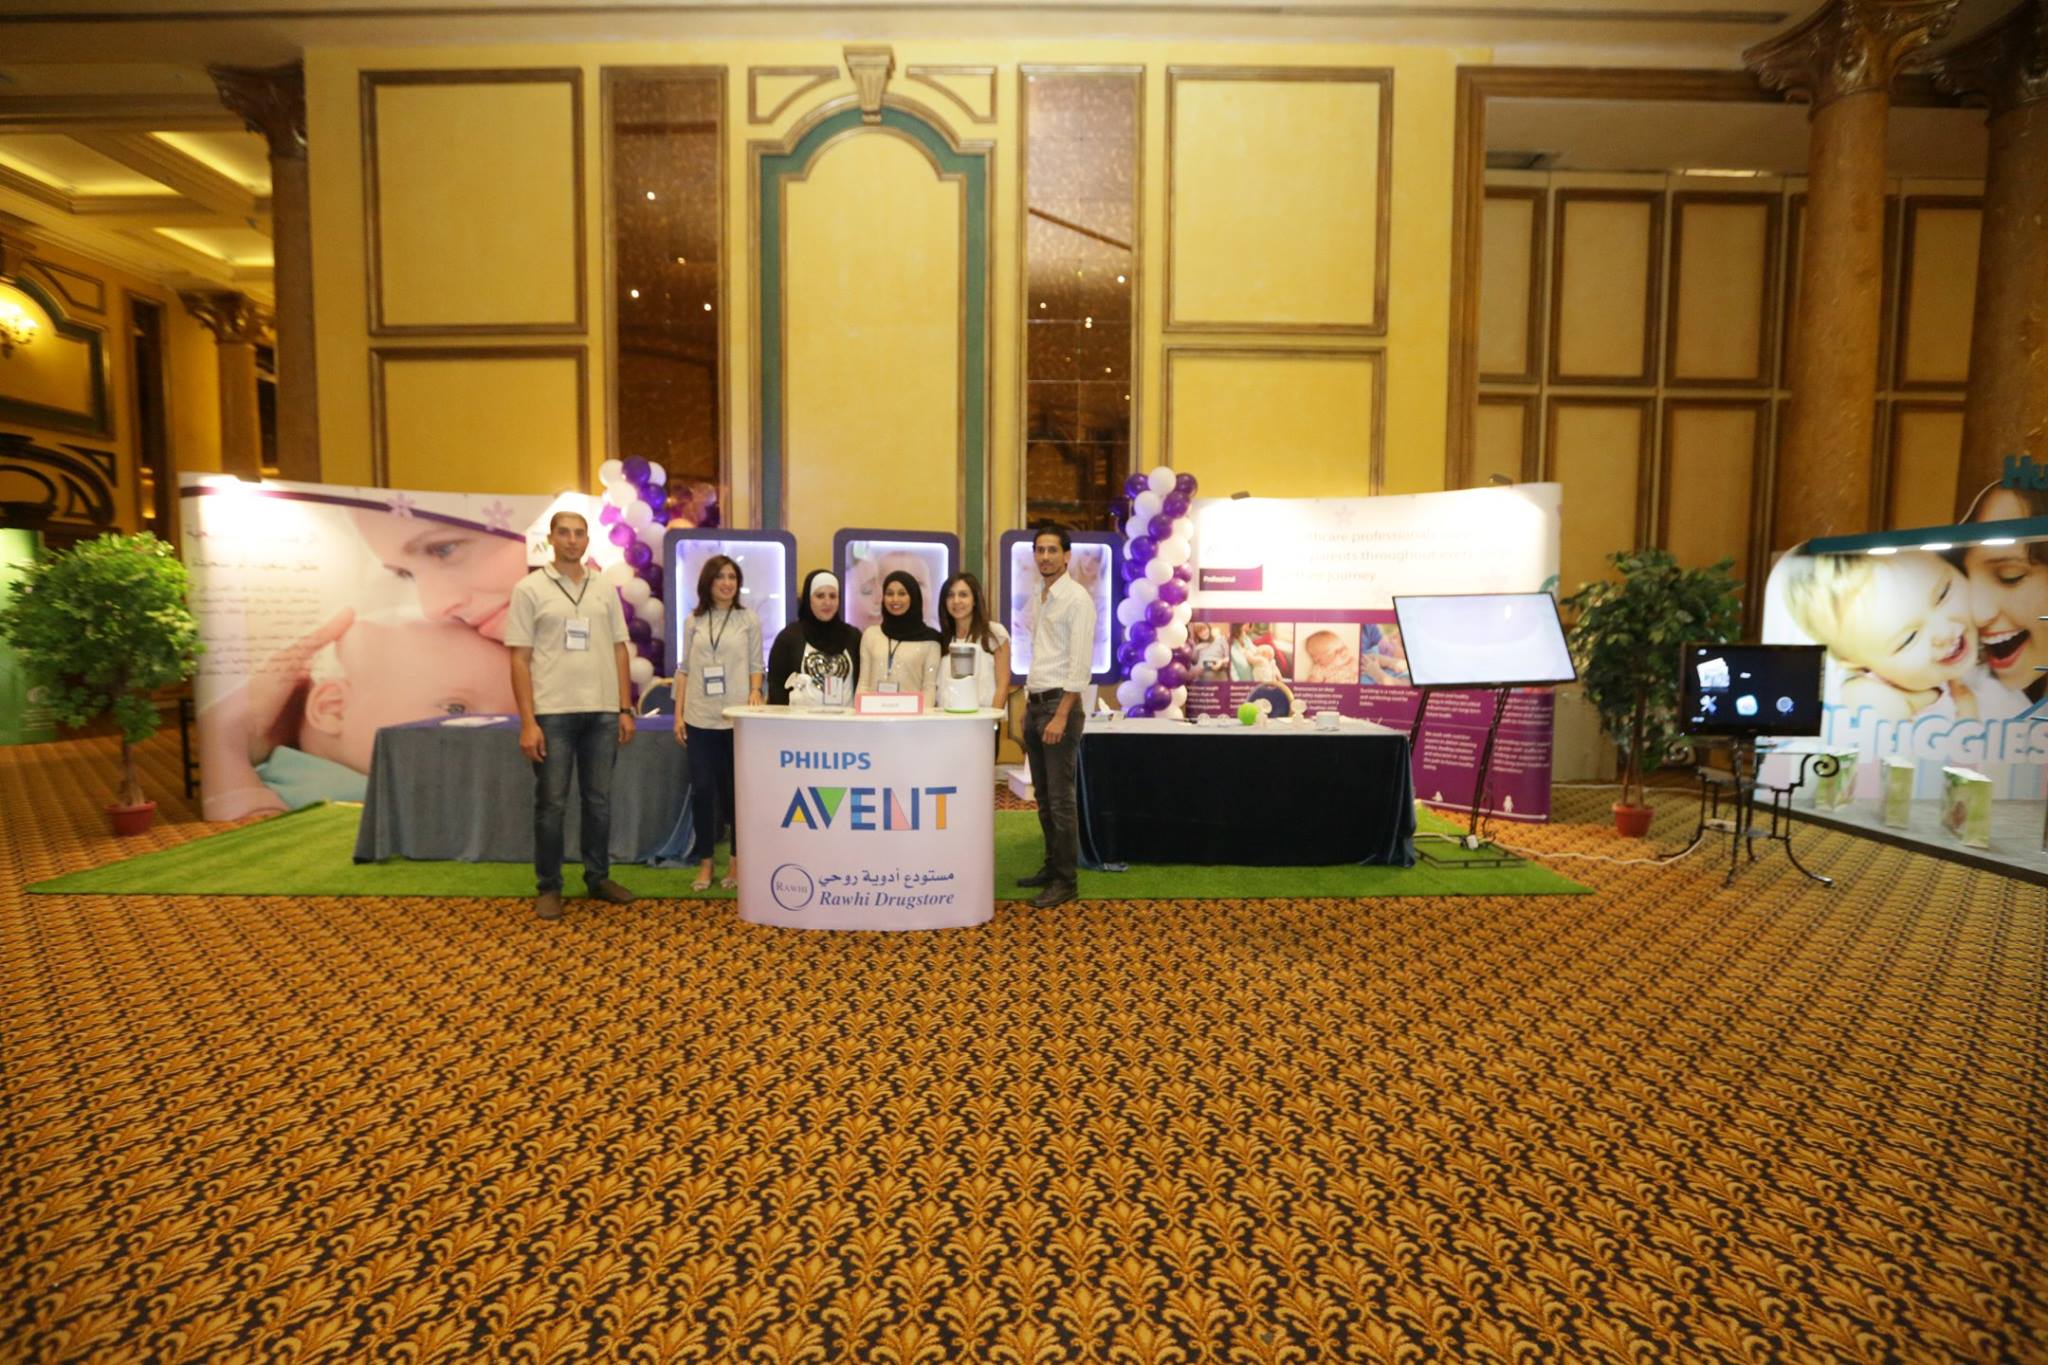 The Jordan First’s International BREASTFEEDING, Maternal and Child Health Conference in Collaboration with the Breastfeeding Support Association